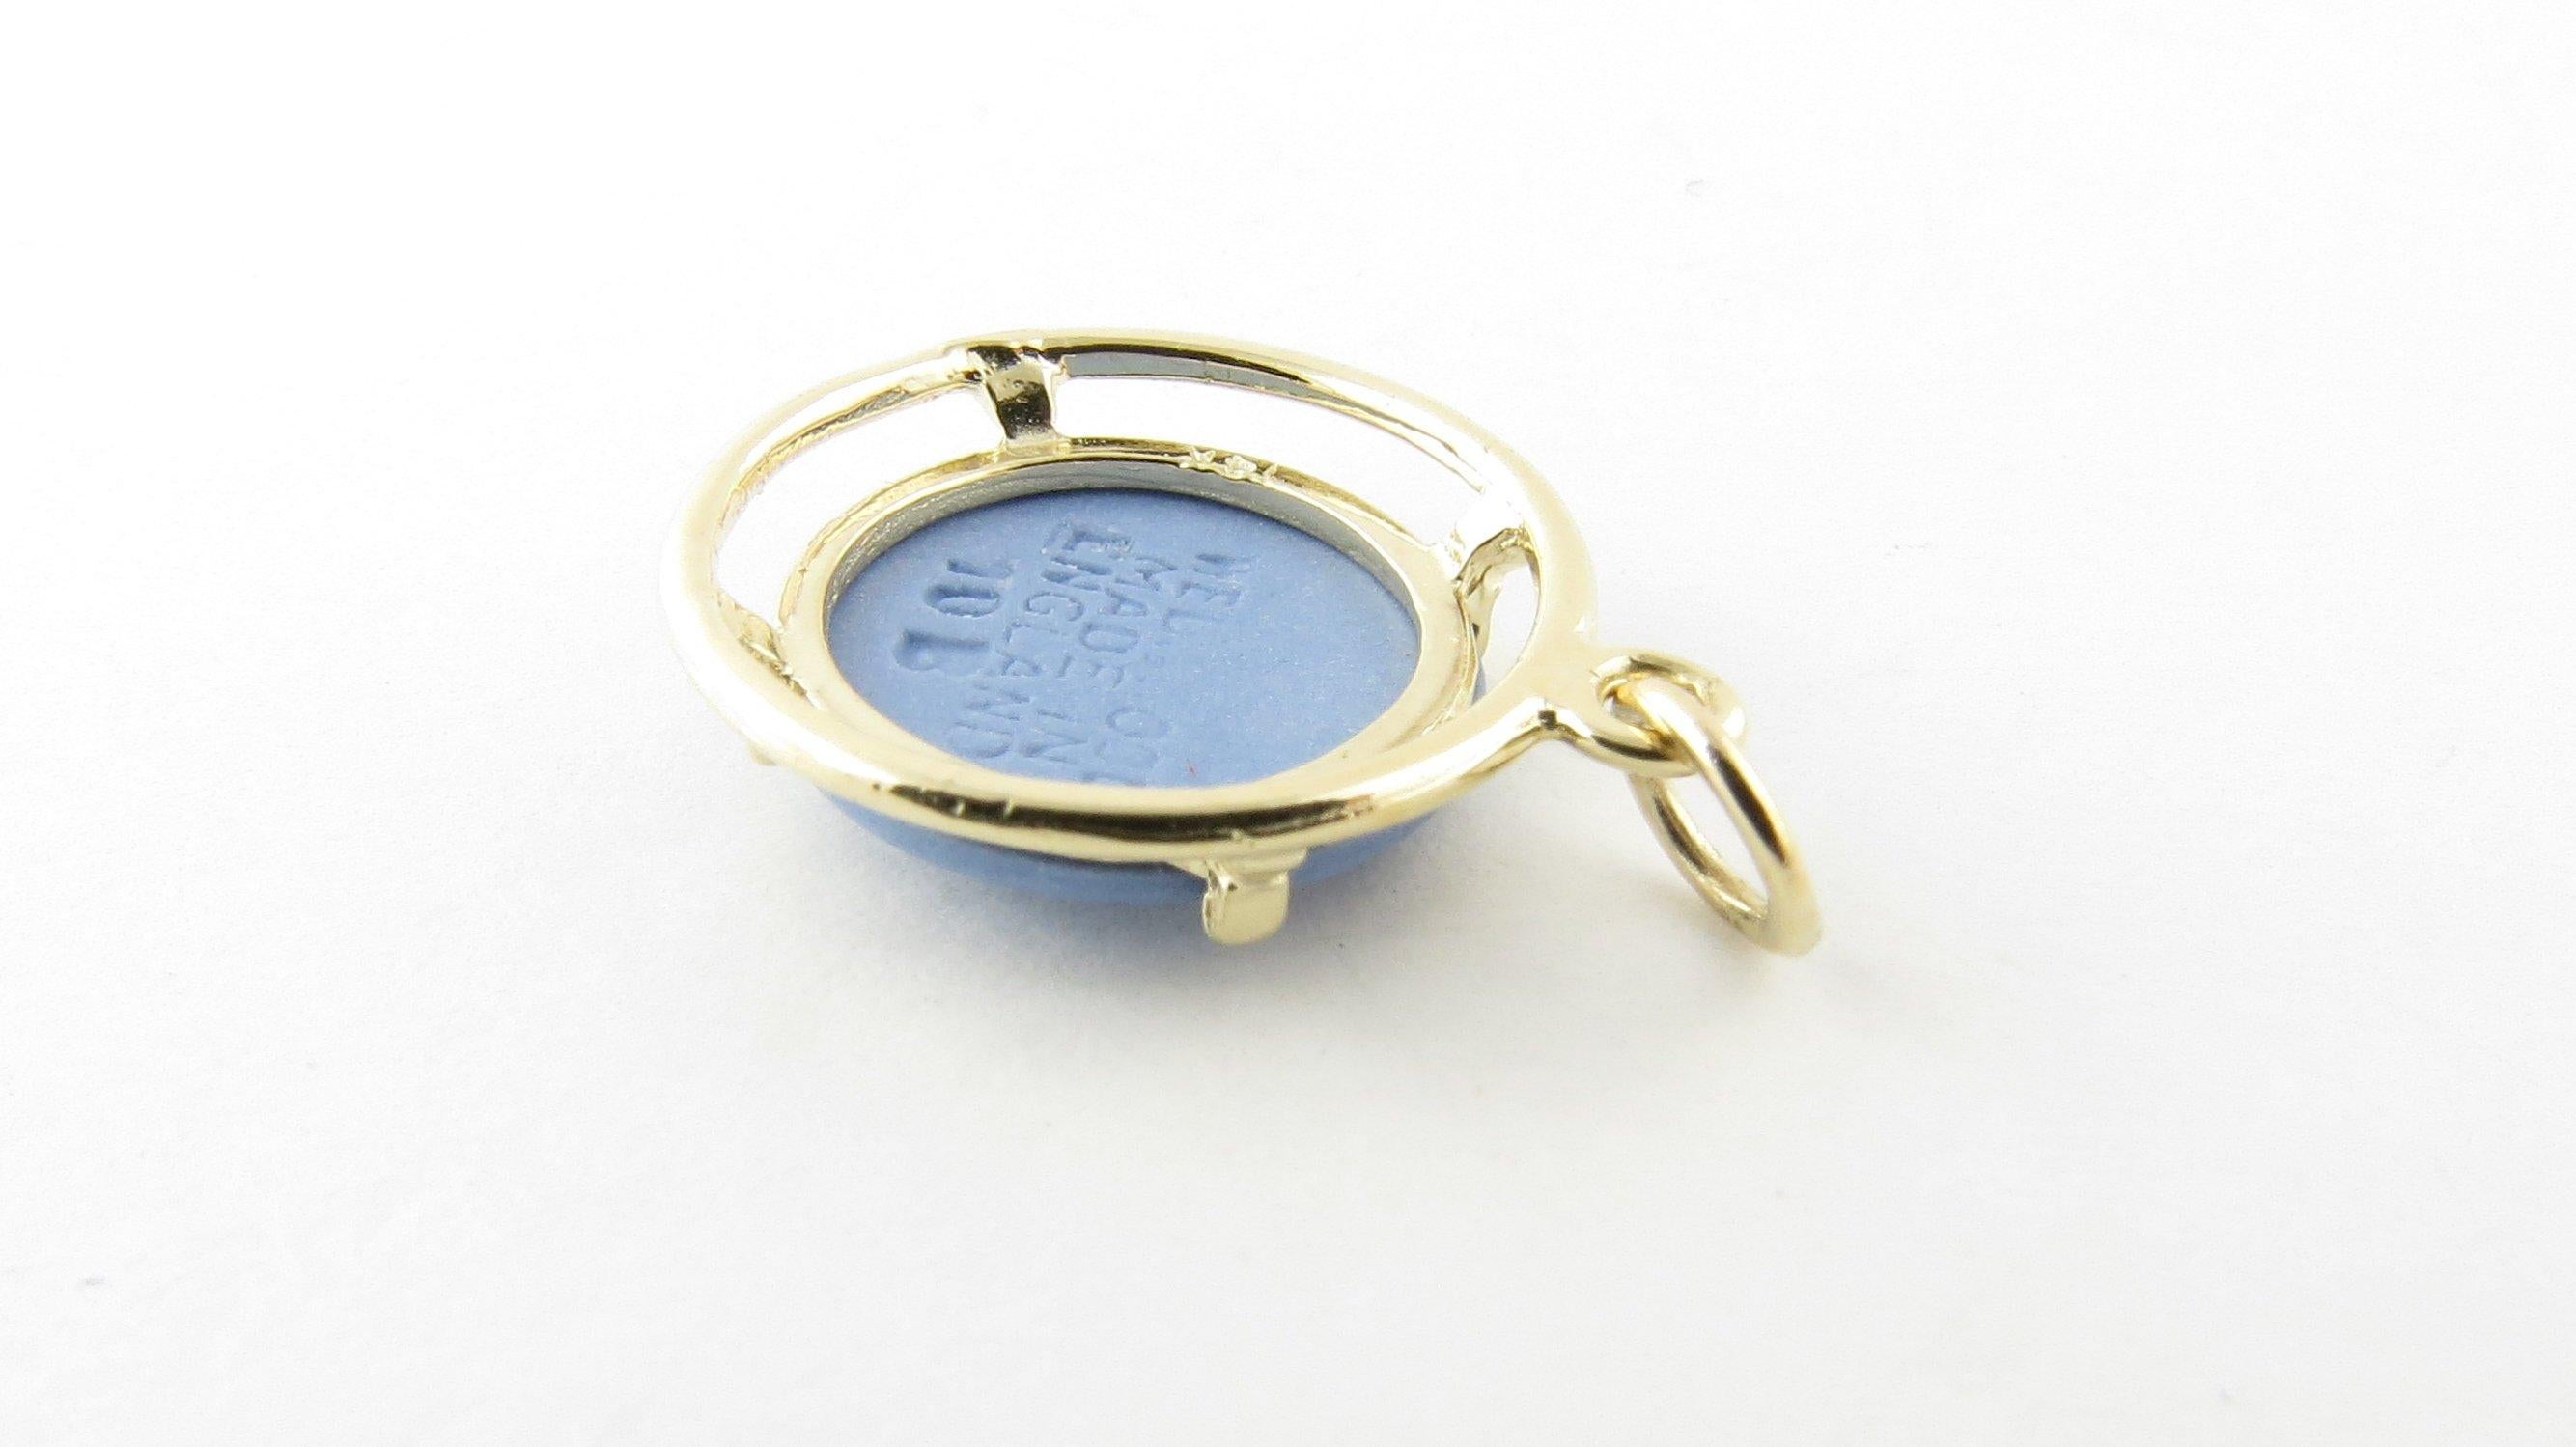 Vintage 14 Karat Yellow Gold Wedgewood Pendant- This lovely blue Wedgewood pendant features a romantic couple framed in beautifully detailed 14K yellow gold. Size: 17 mm Weight: 1.0 dwt. / 1.7 gr. Stamped: 14K Very good condition, professionally